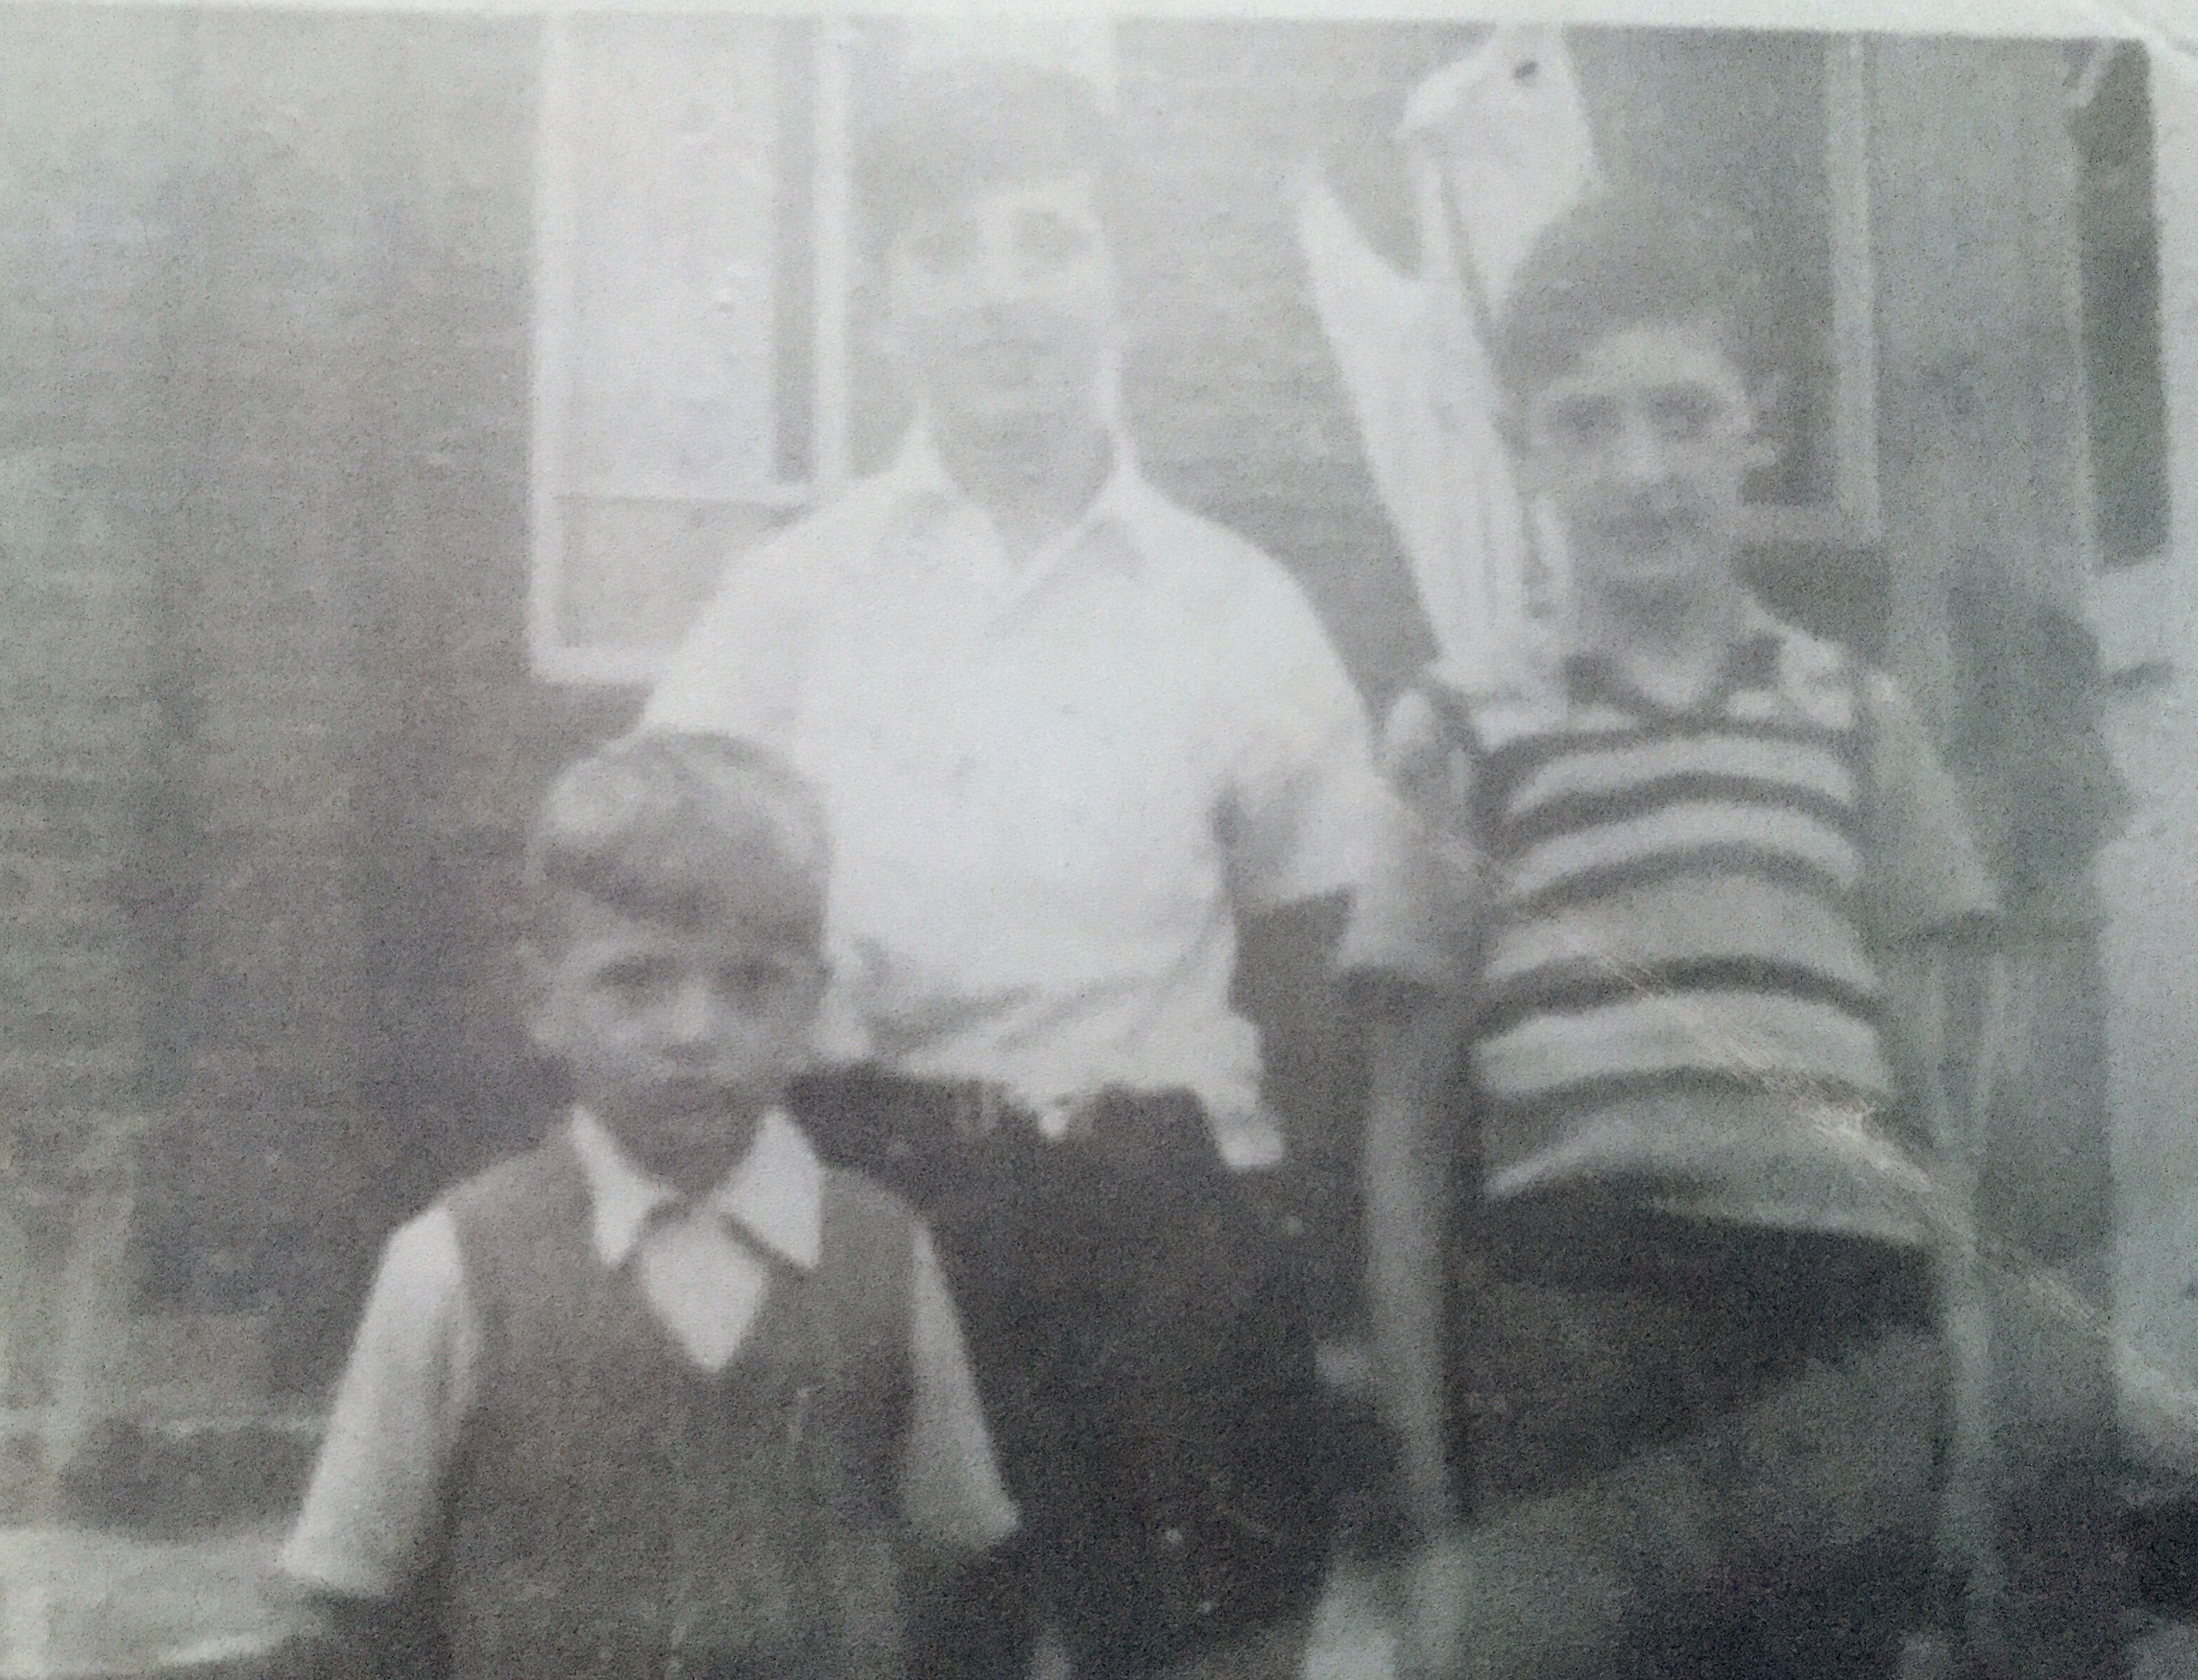 Brian,Dave, and me photo taken at 139 Leomister Road in 1958 the only phono where I am with my two brothers was taken.